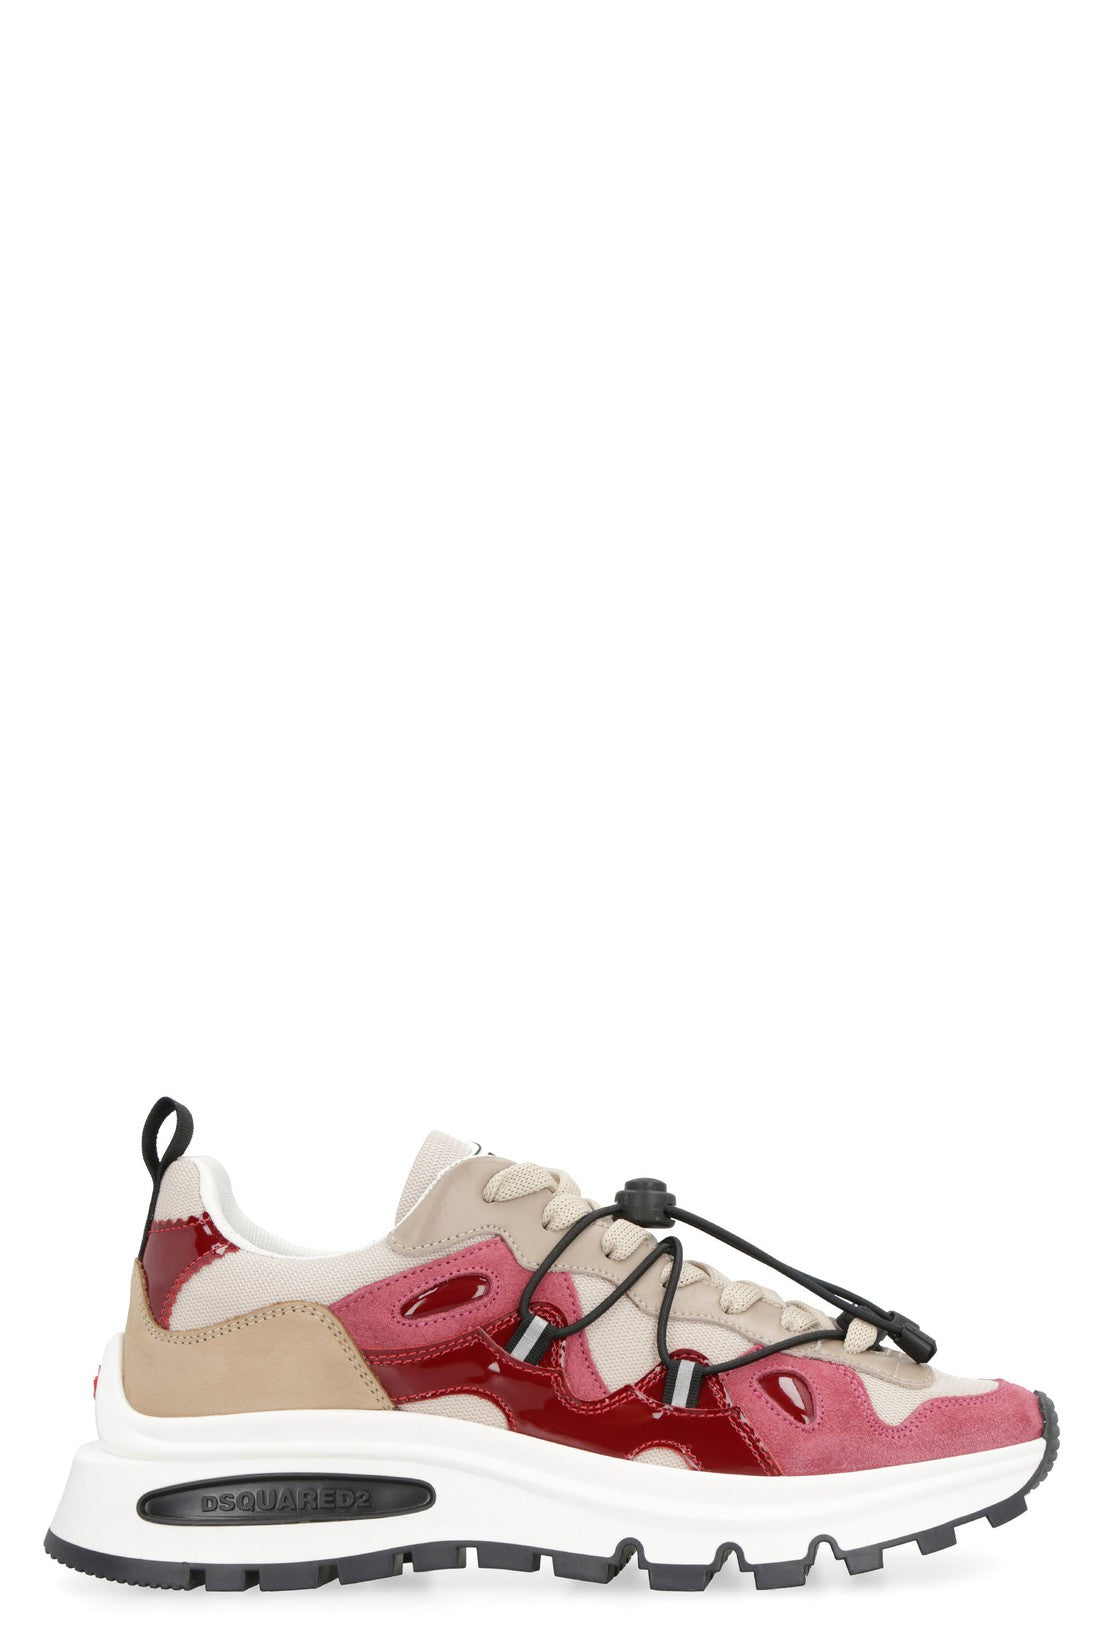 Dsquared2-OUTLET-SALE-Run Ds2 low-top sneakers-ARCHIVIST